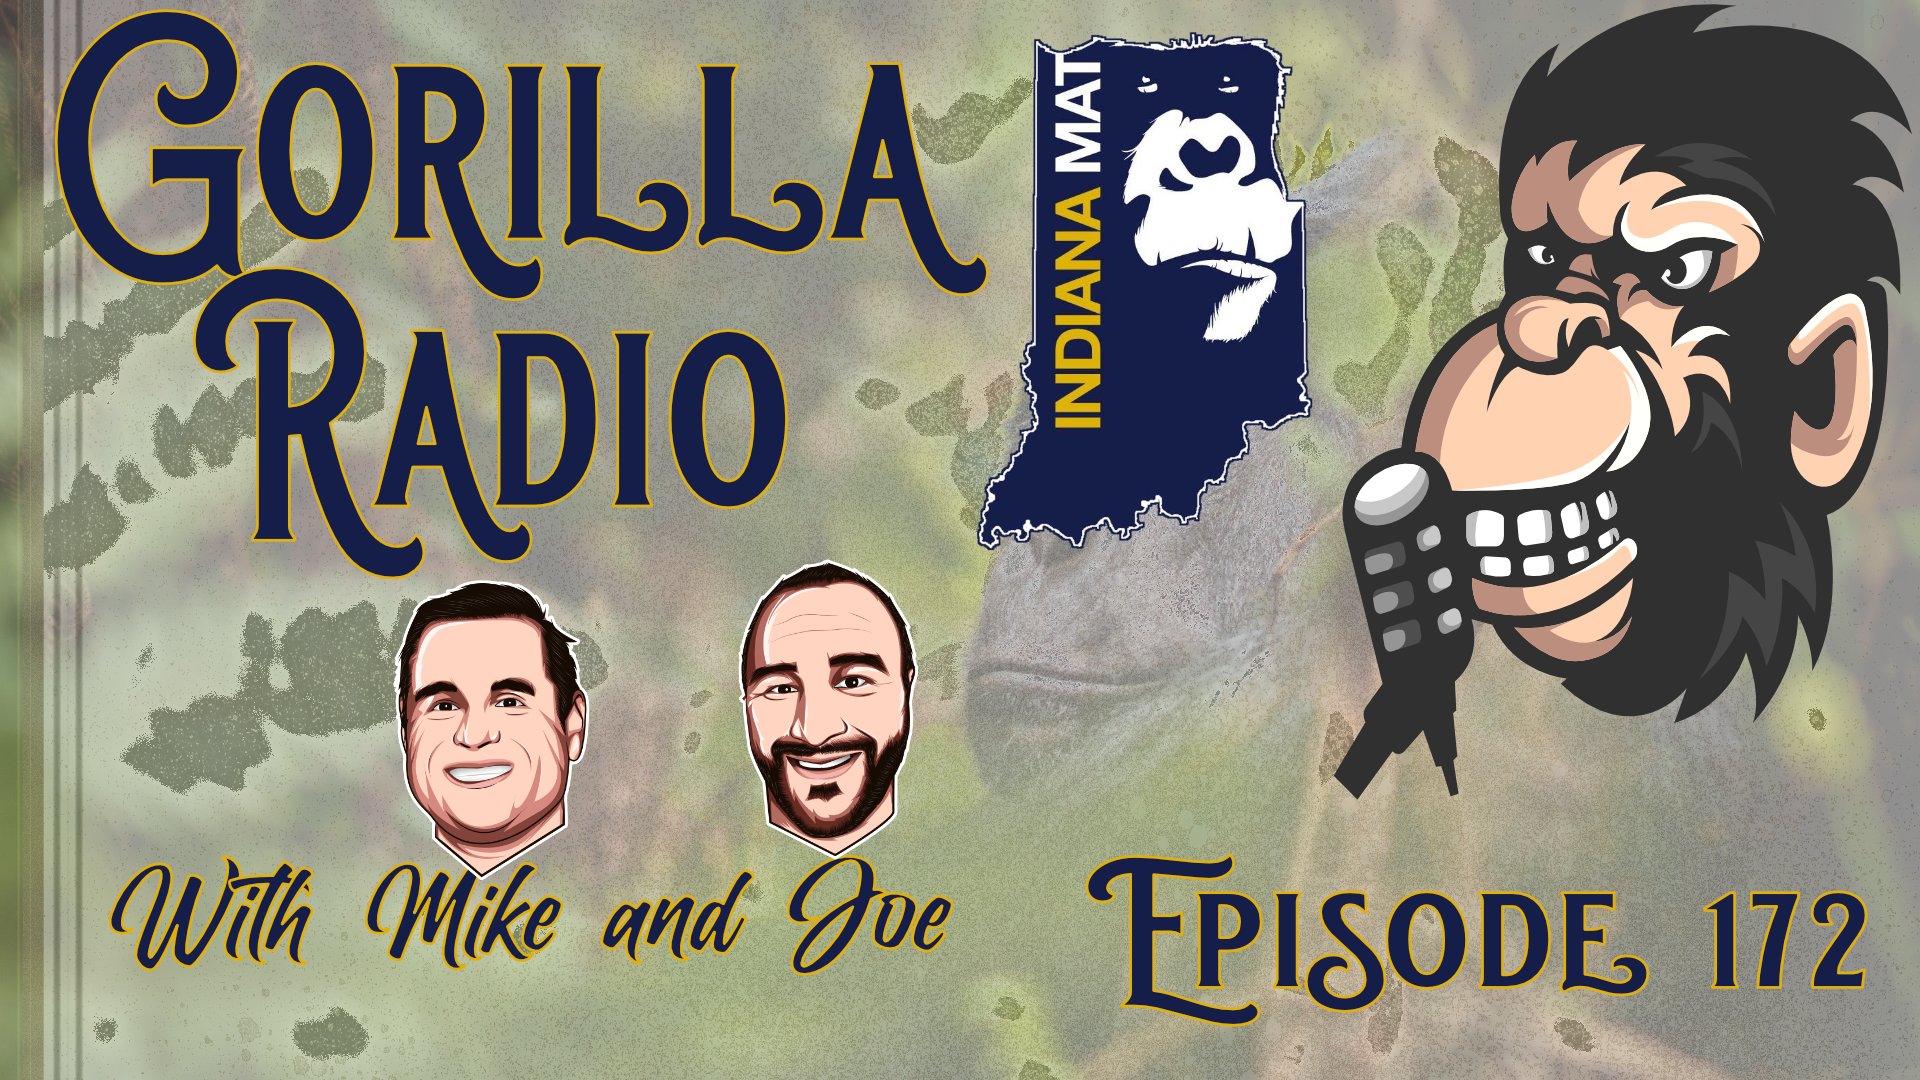 More information about "IndianaMat Gorilla Radio Episode 175- East Chicago Semi-State"